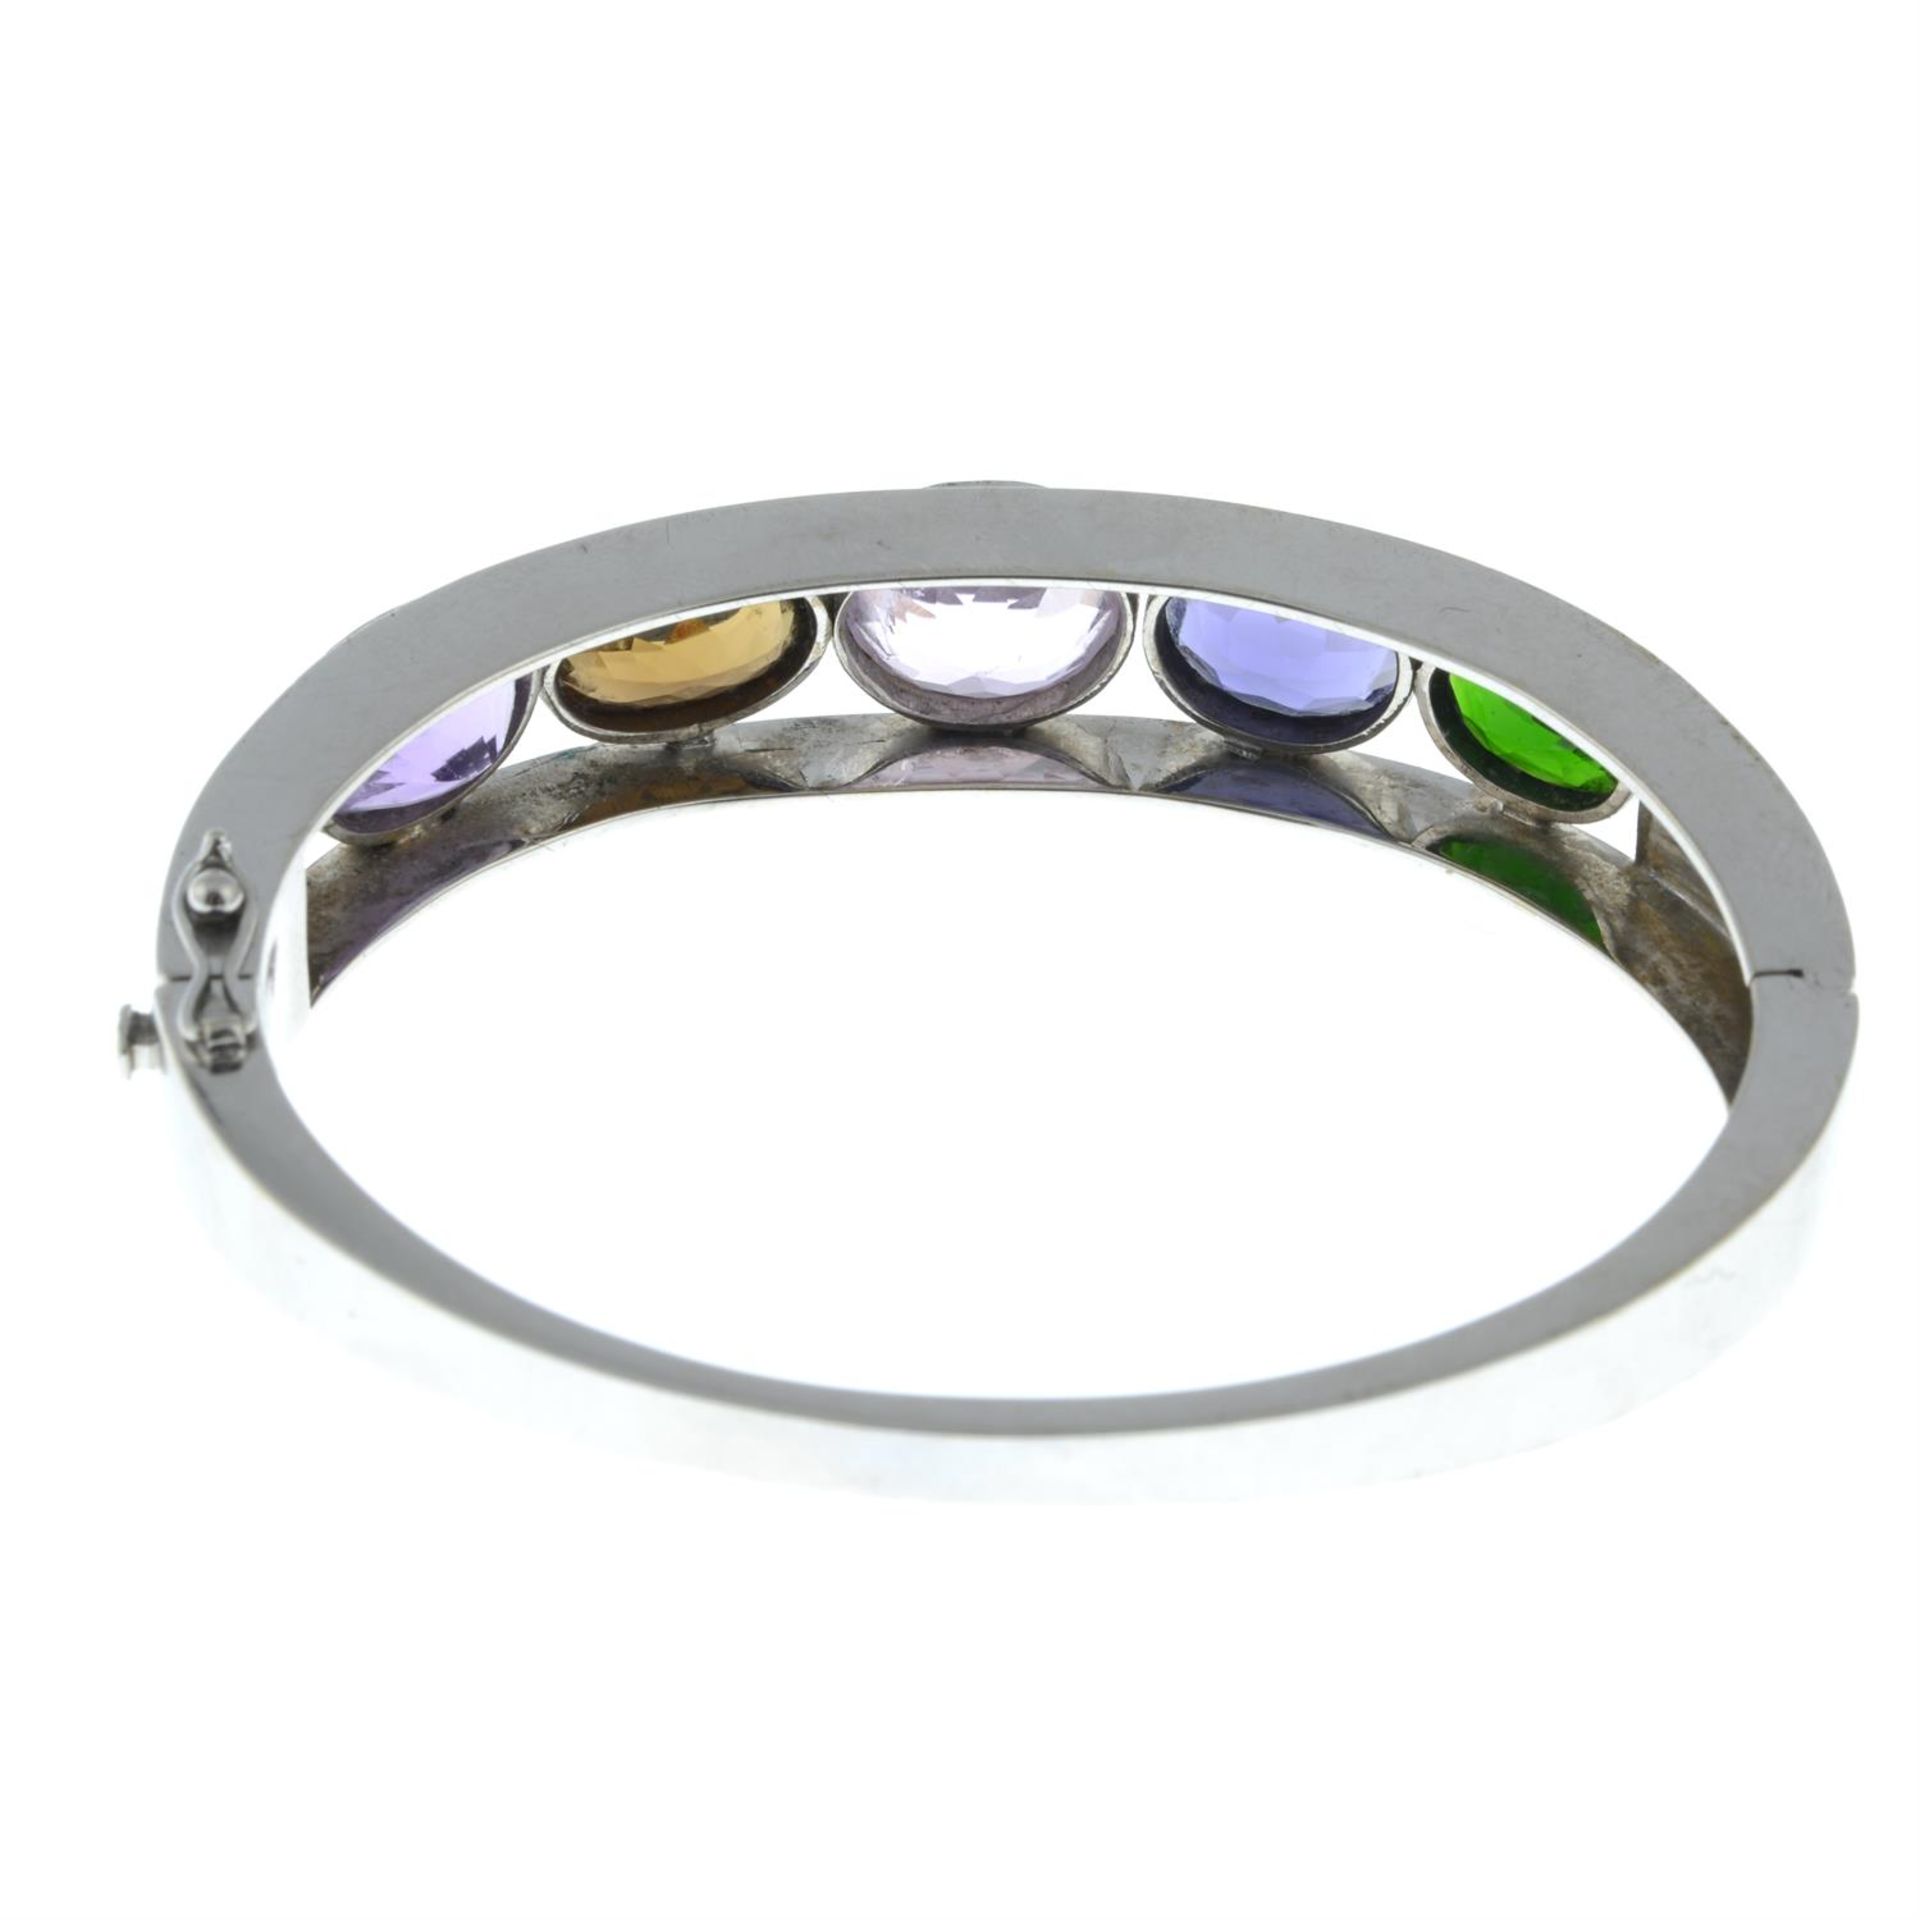 A hinged bangle, with amethyst, morganite, iolite and further collet-set gems. - Image 3 of 3